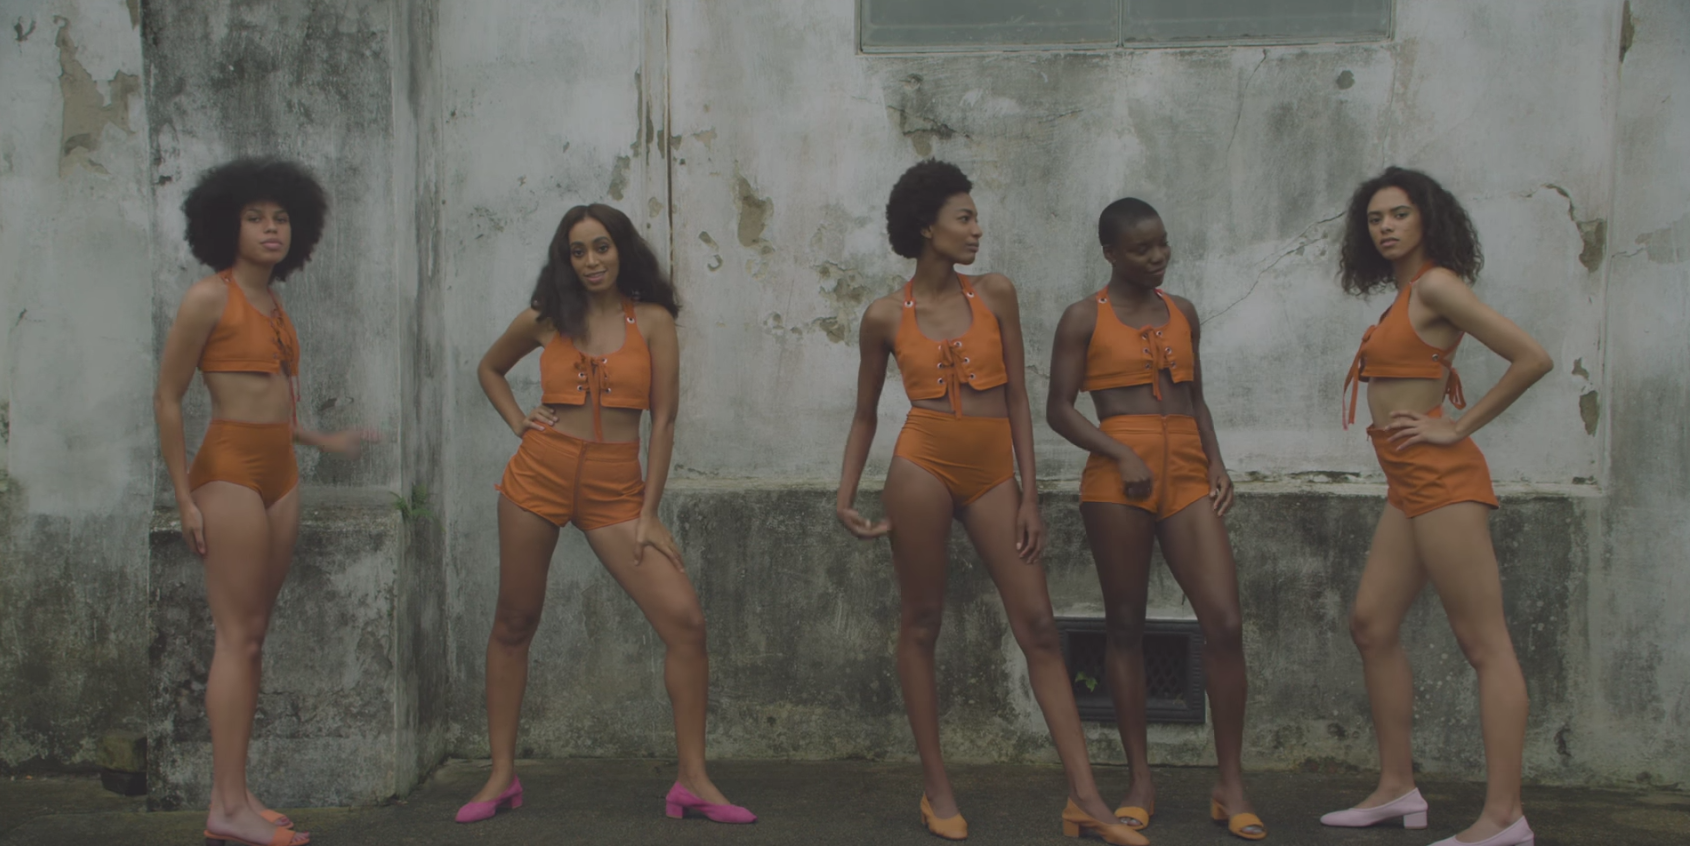 Solange's 'Don't Touch My Hair' Is The Anthem We've Been Waiting For
